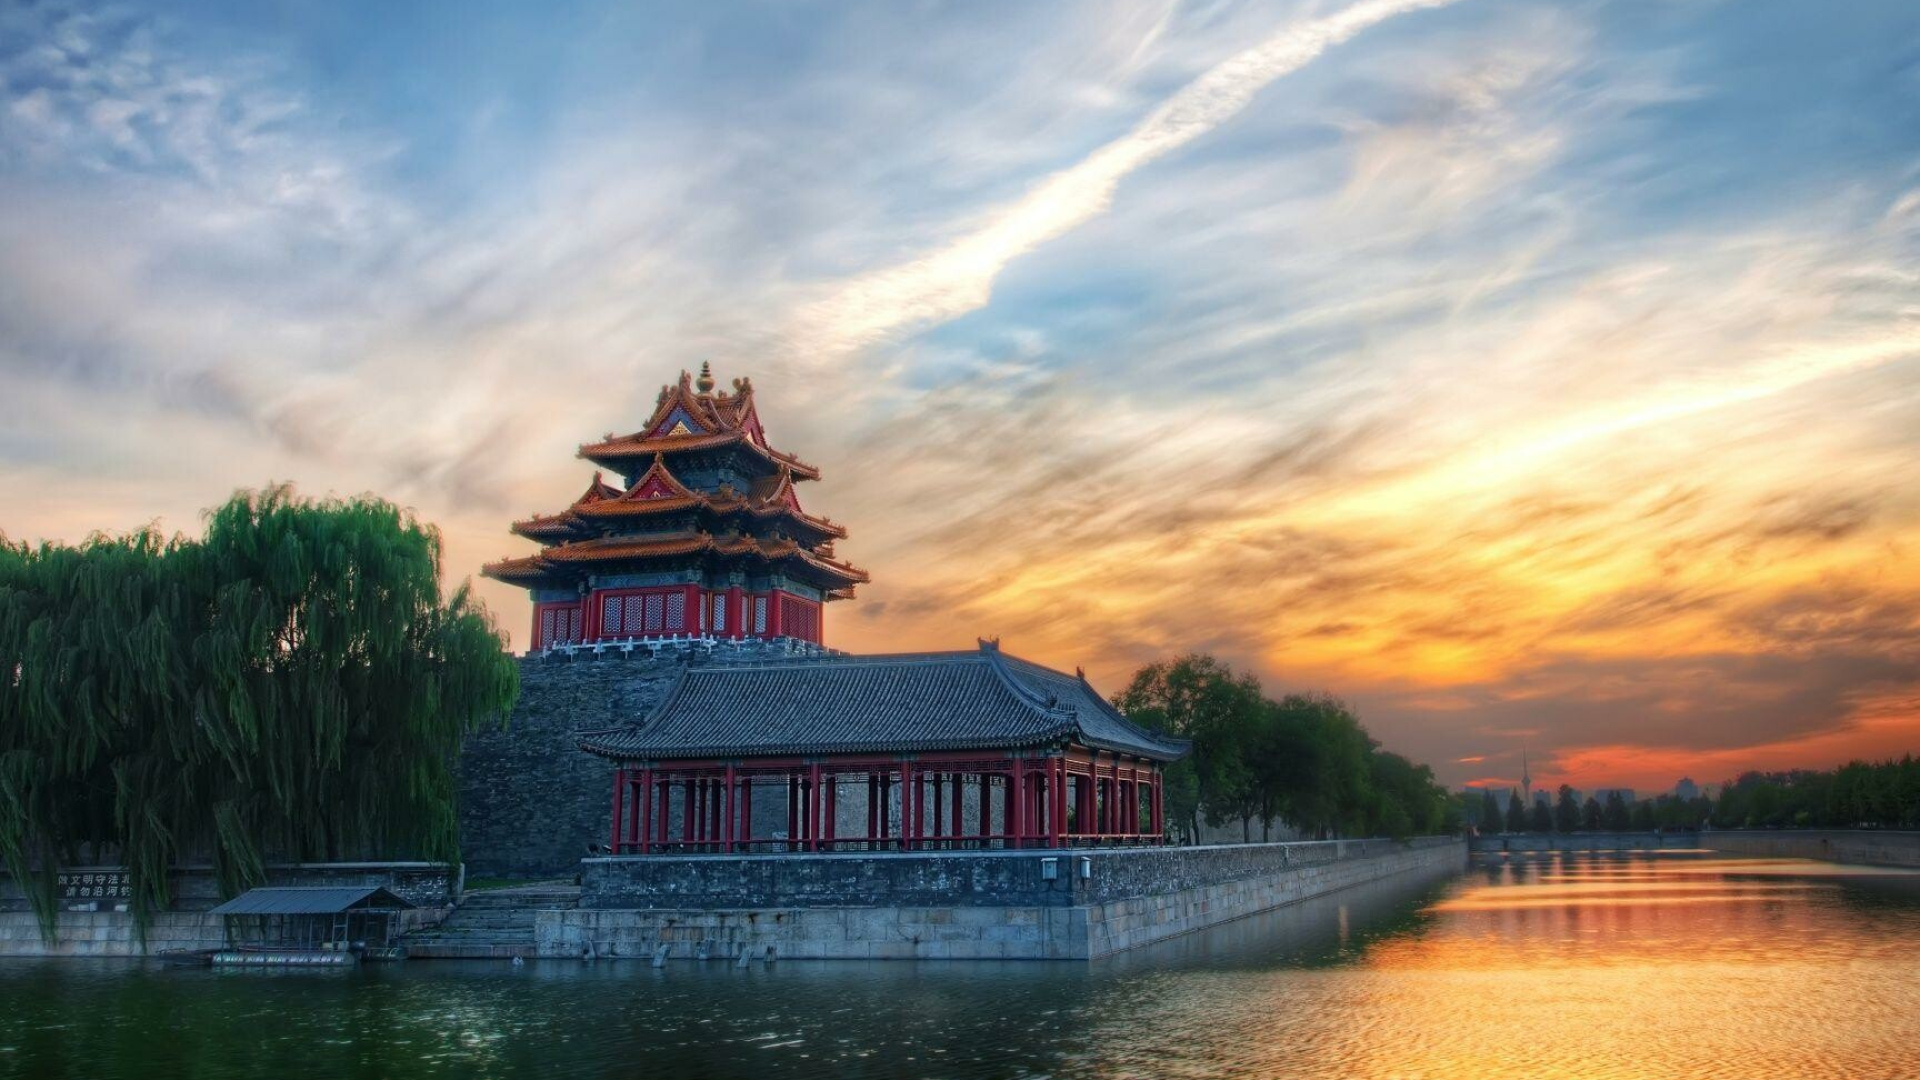 China: Forbidden City, A palace complex in Dongcheng District, Beijing. 1920x1080 Full HD Wallpaper.